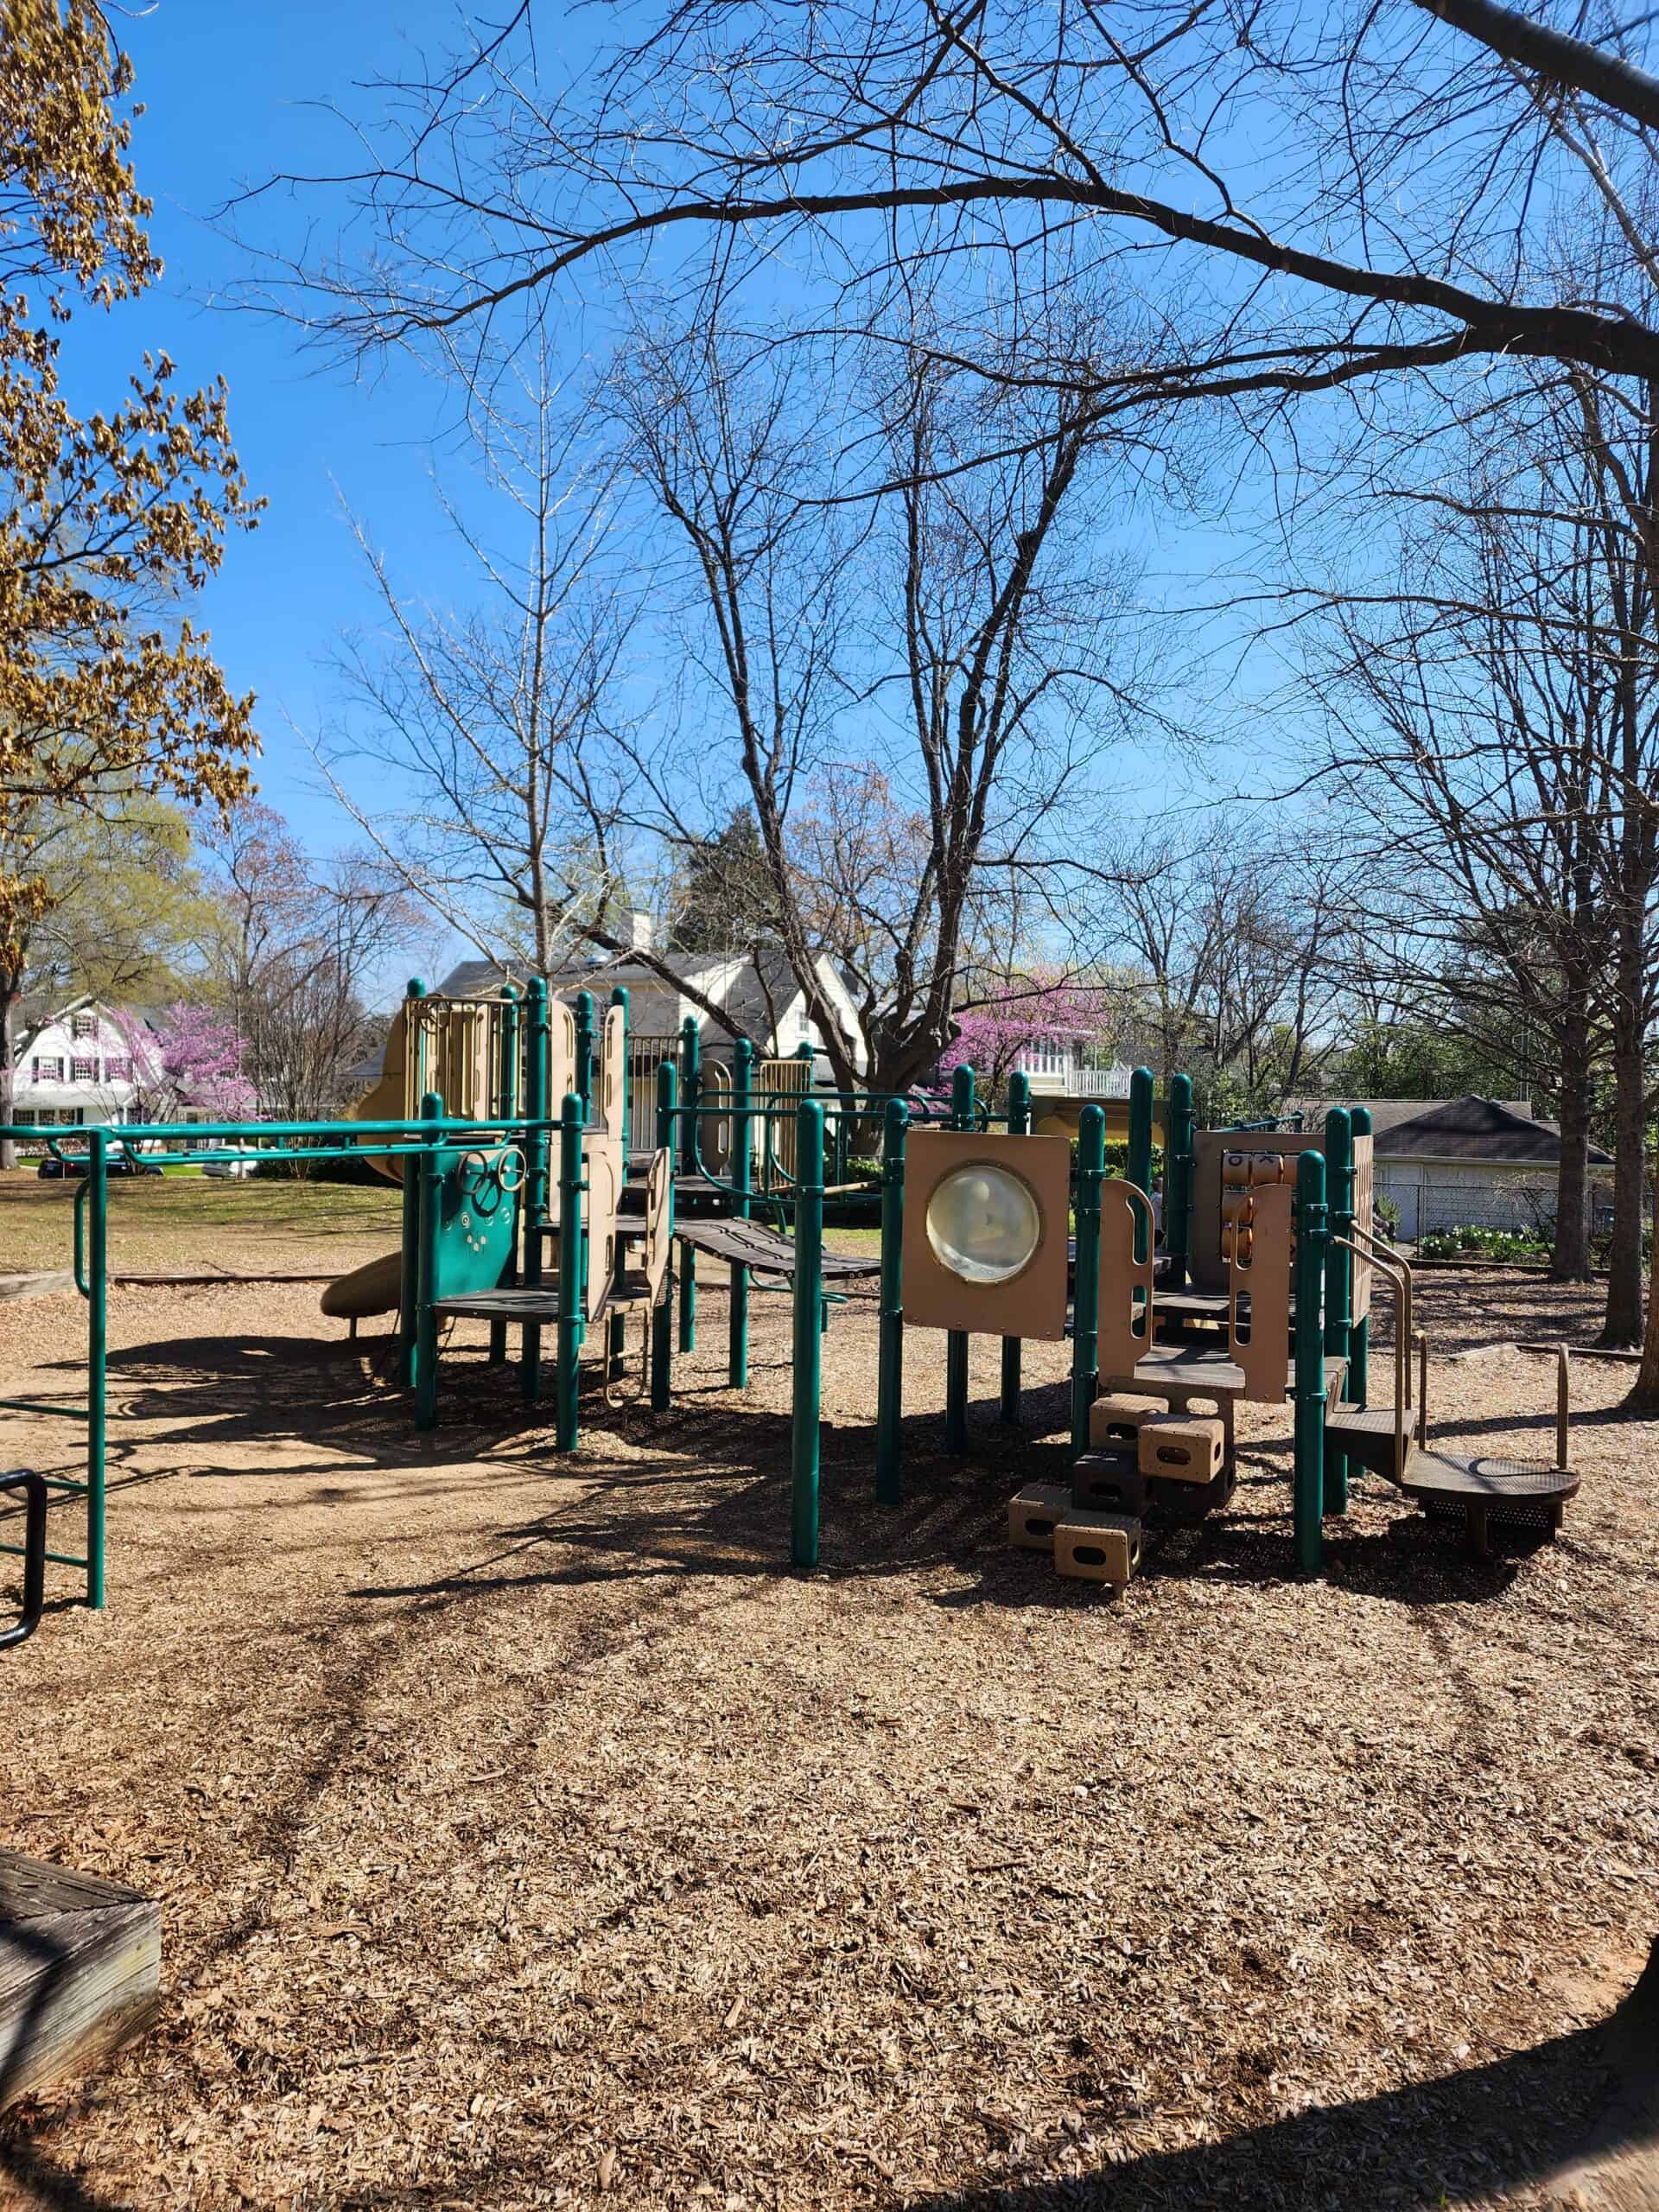 a playground with green equipment nestled among bare trees under a bright blue sky, featuring slides, climbing areas, and interactive panels, surrounded by a layer of wood chips on the ground, evoking a calm and inviting atmosphere for play.